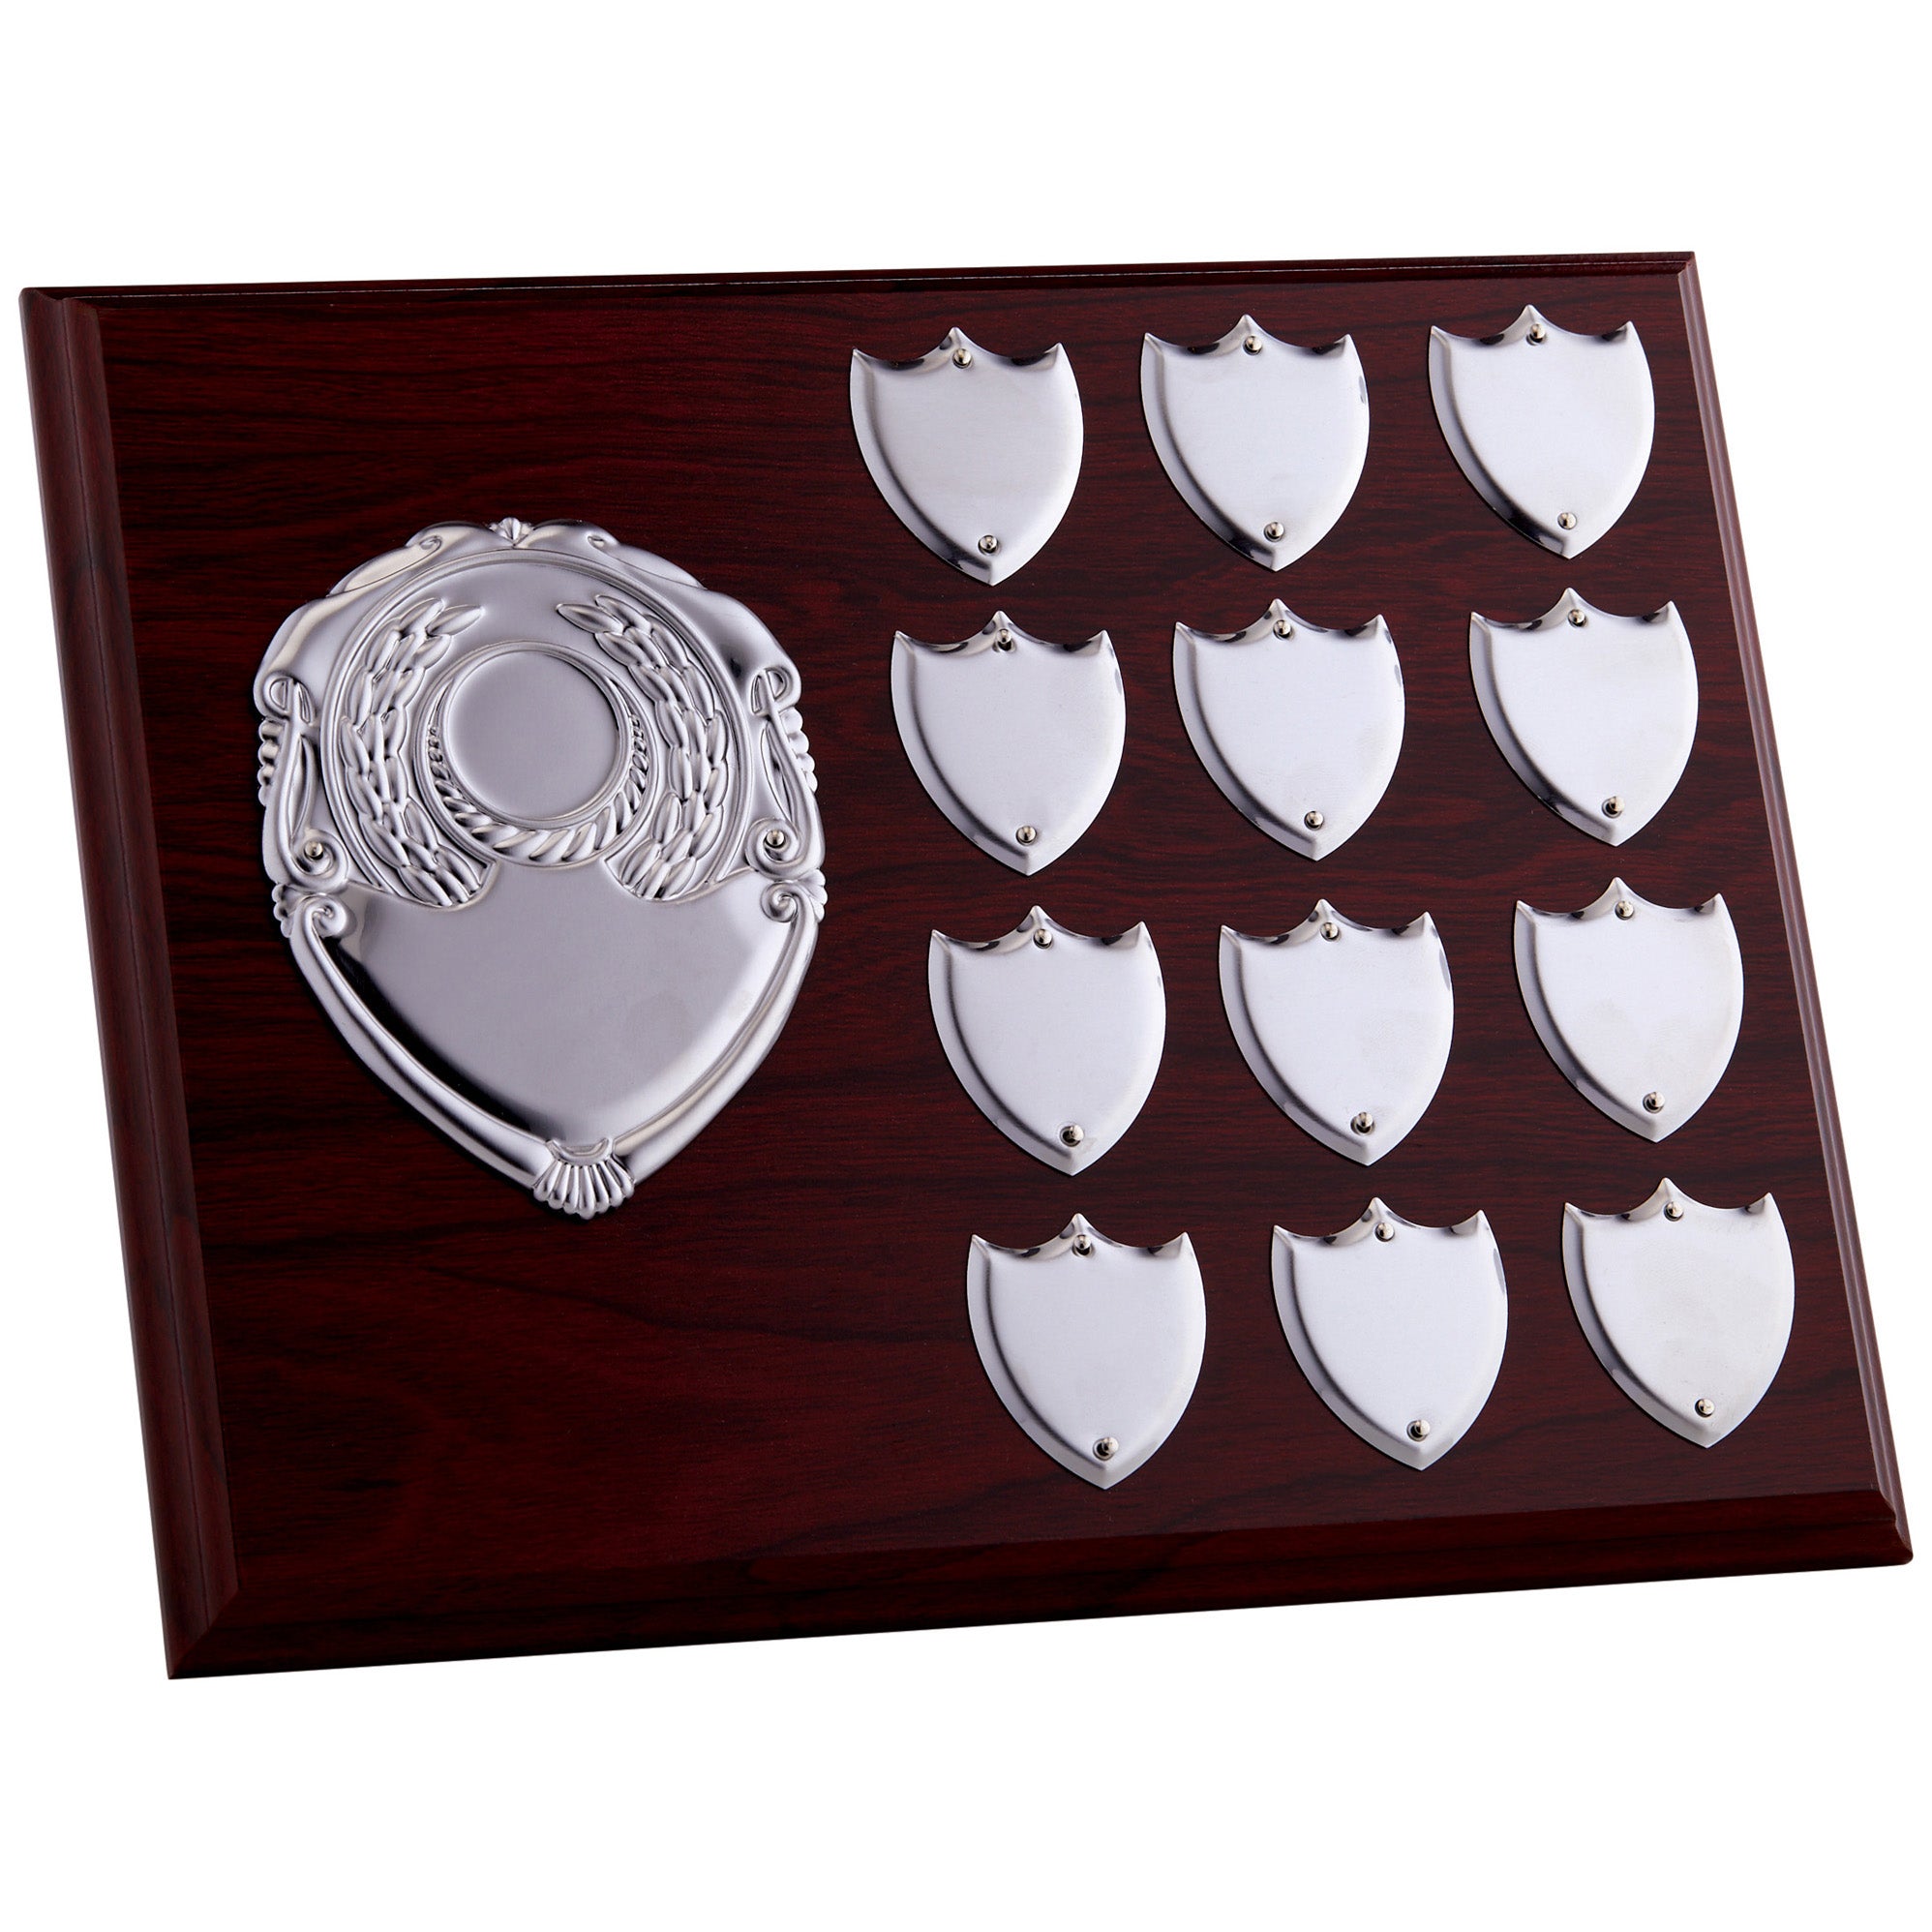 10x8" Wooden Presentation Perpetual Plaque with 12 Mini Shields